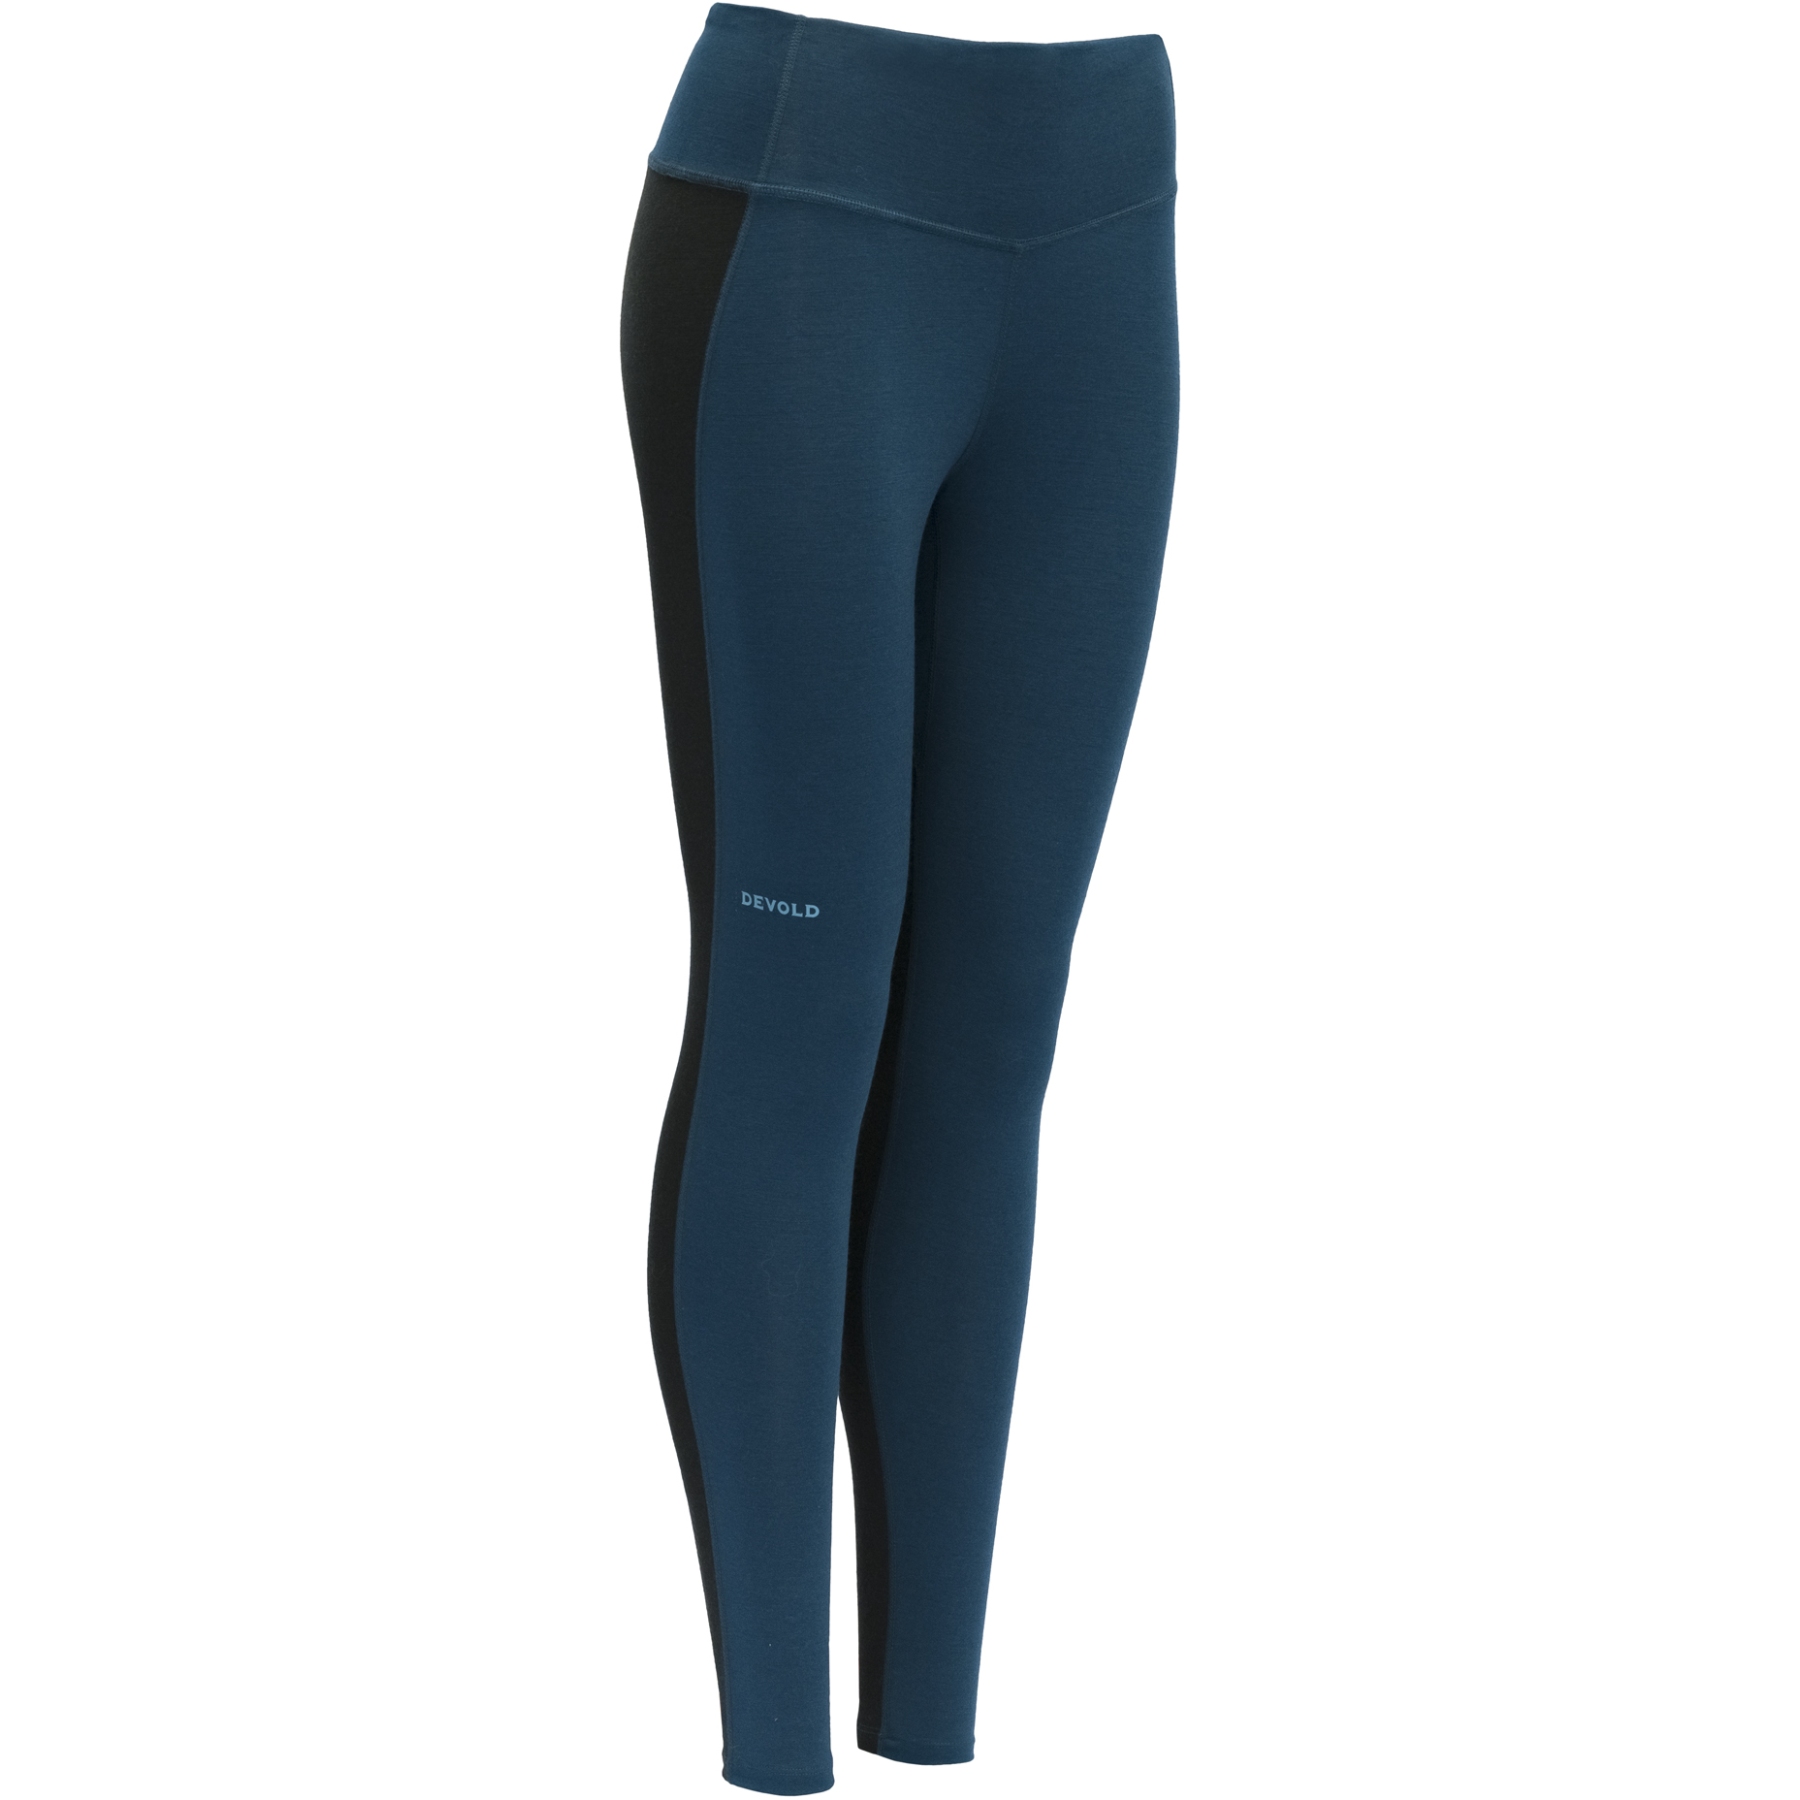 Picture of Devold Running Merino Tights Women - 422A Flood